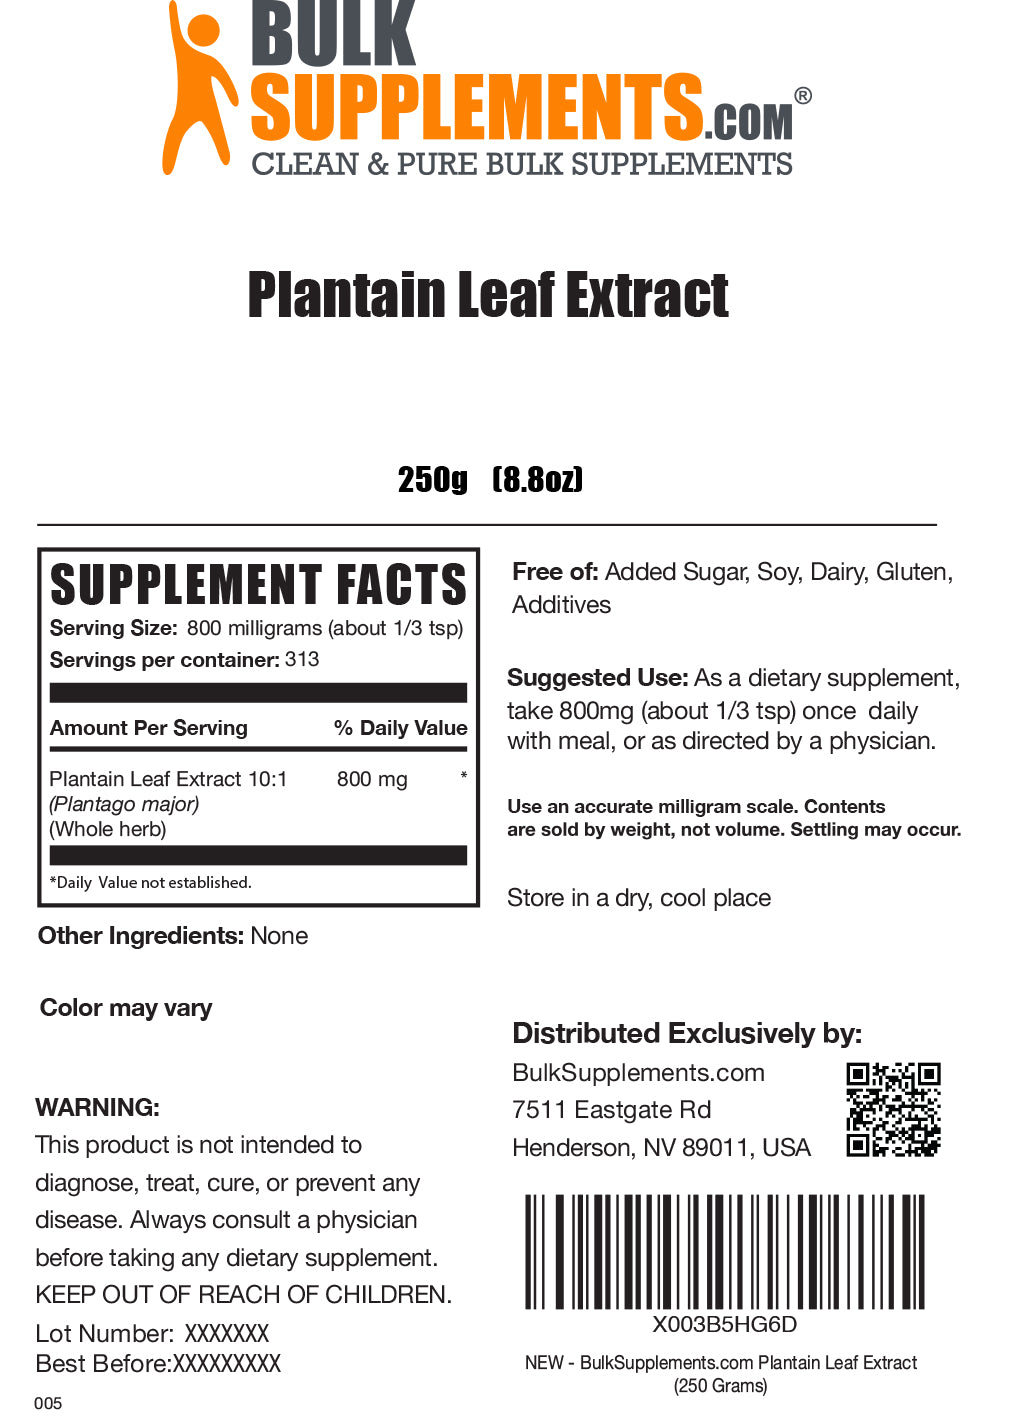 Plantain leaf extract powder label 250g